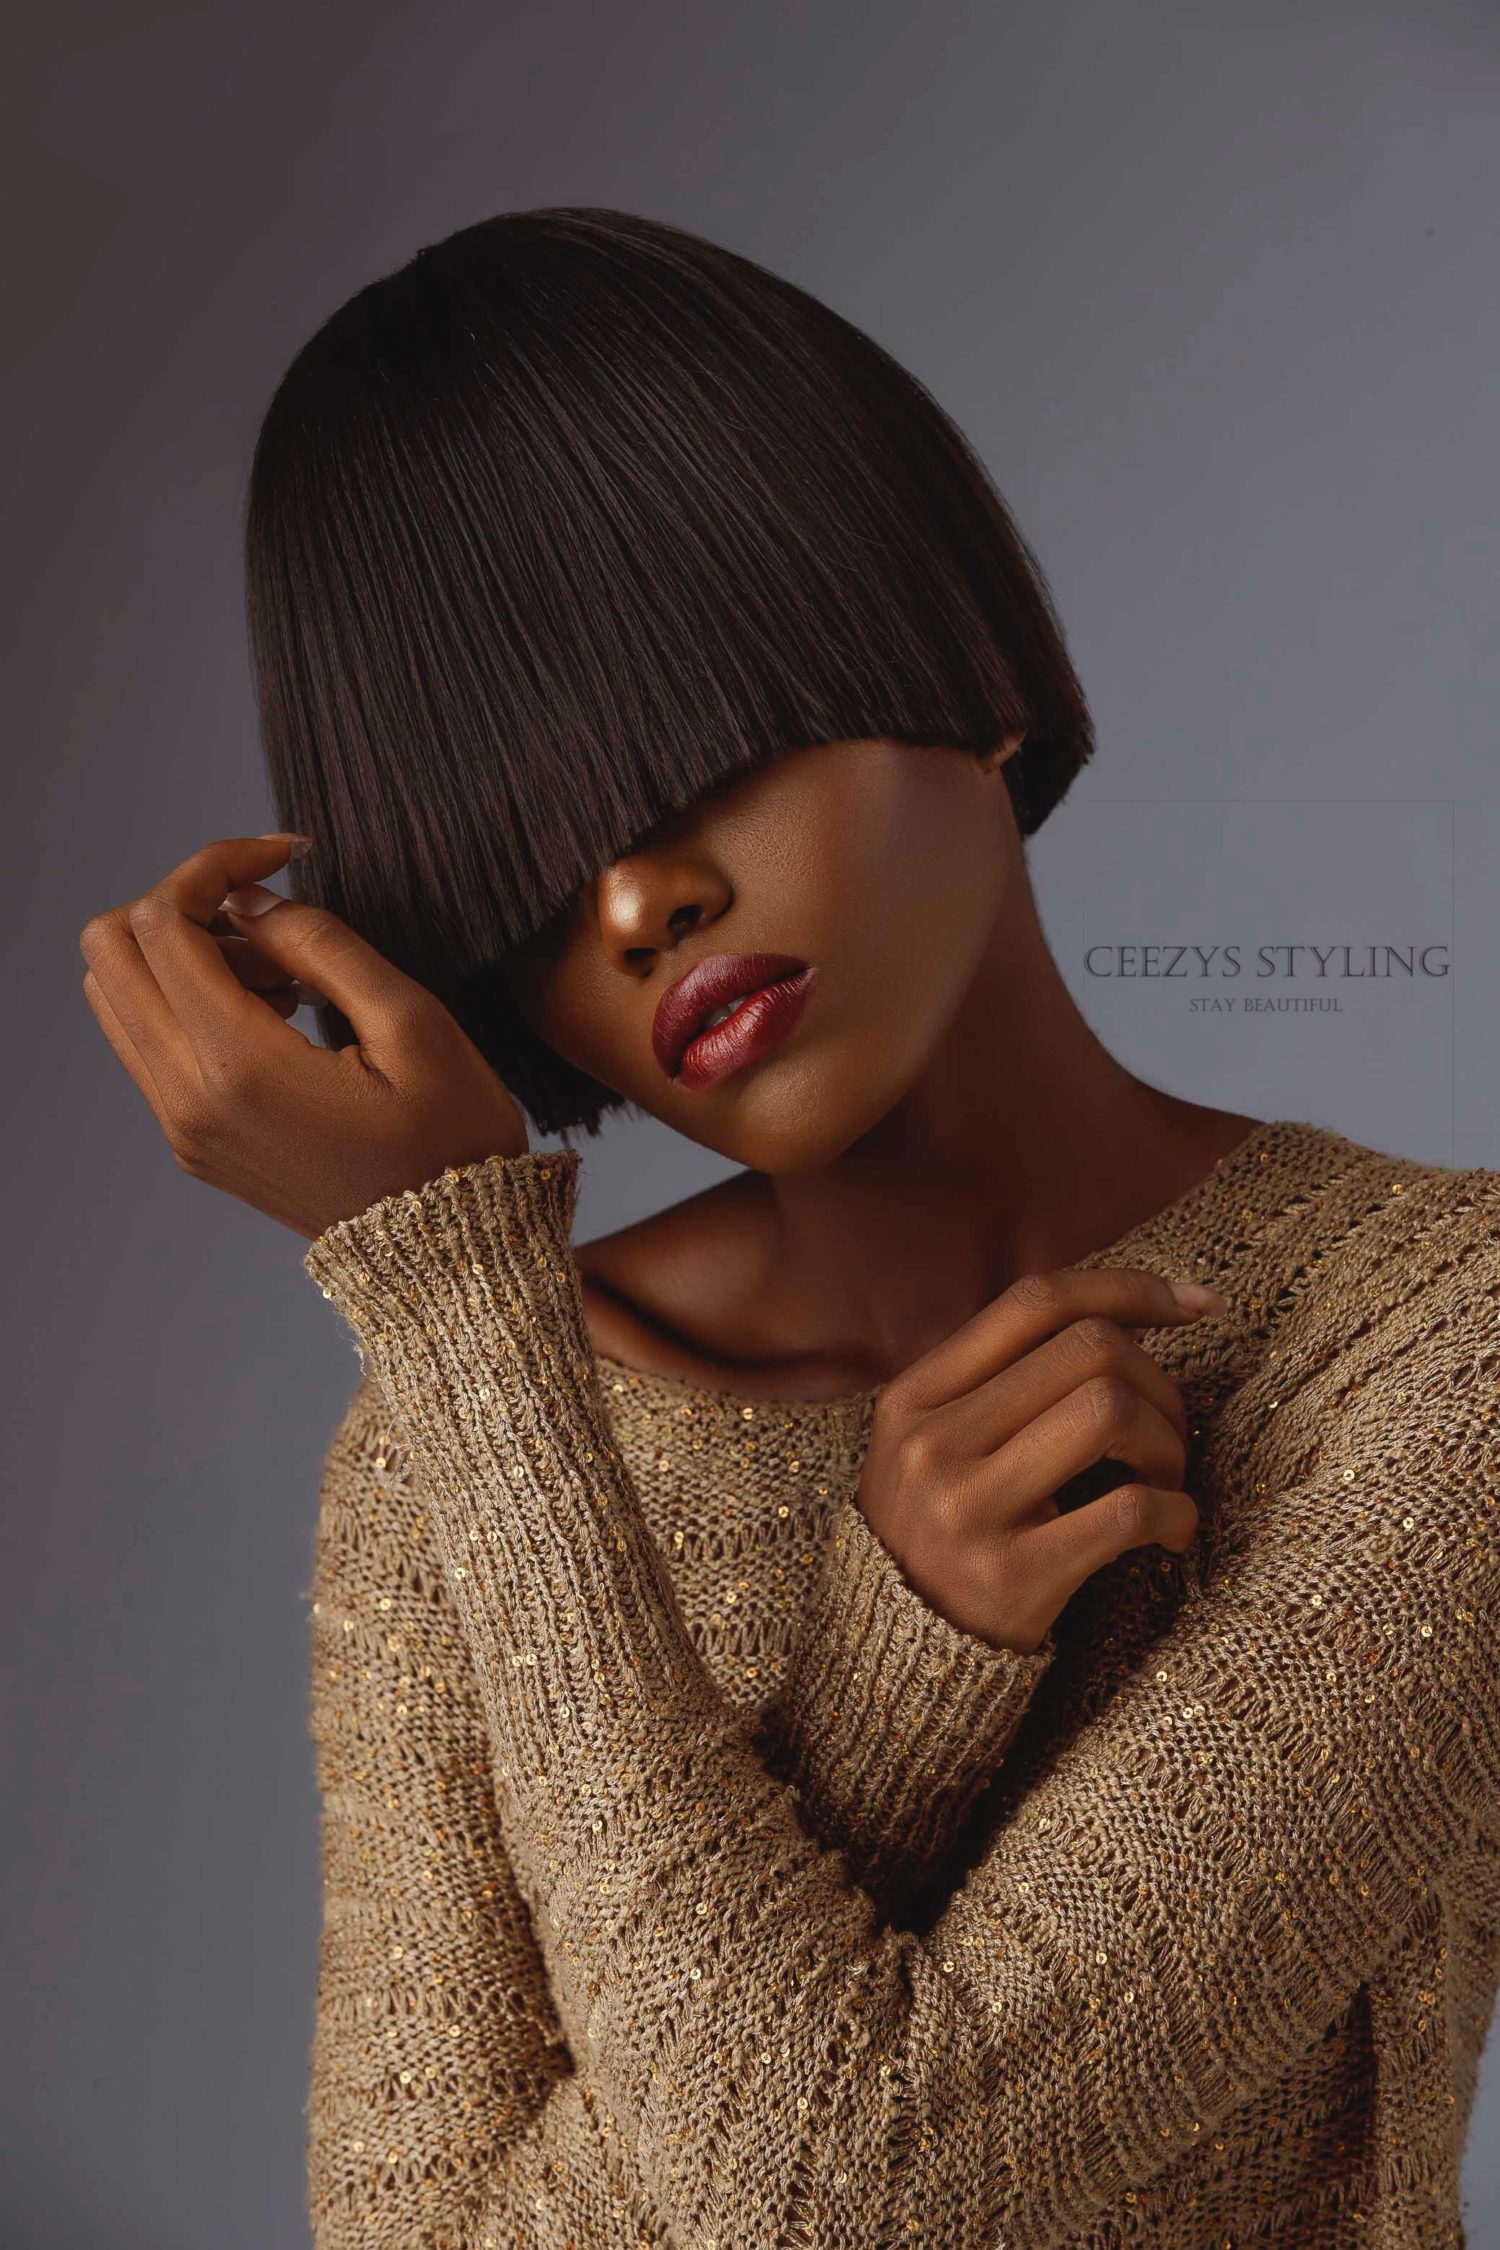 This Out-Of-The Box Editorial By Ceezys Styling Is Lowkey #ShortHairGoals